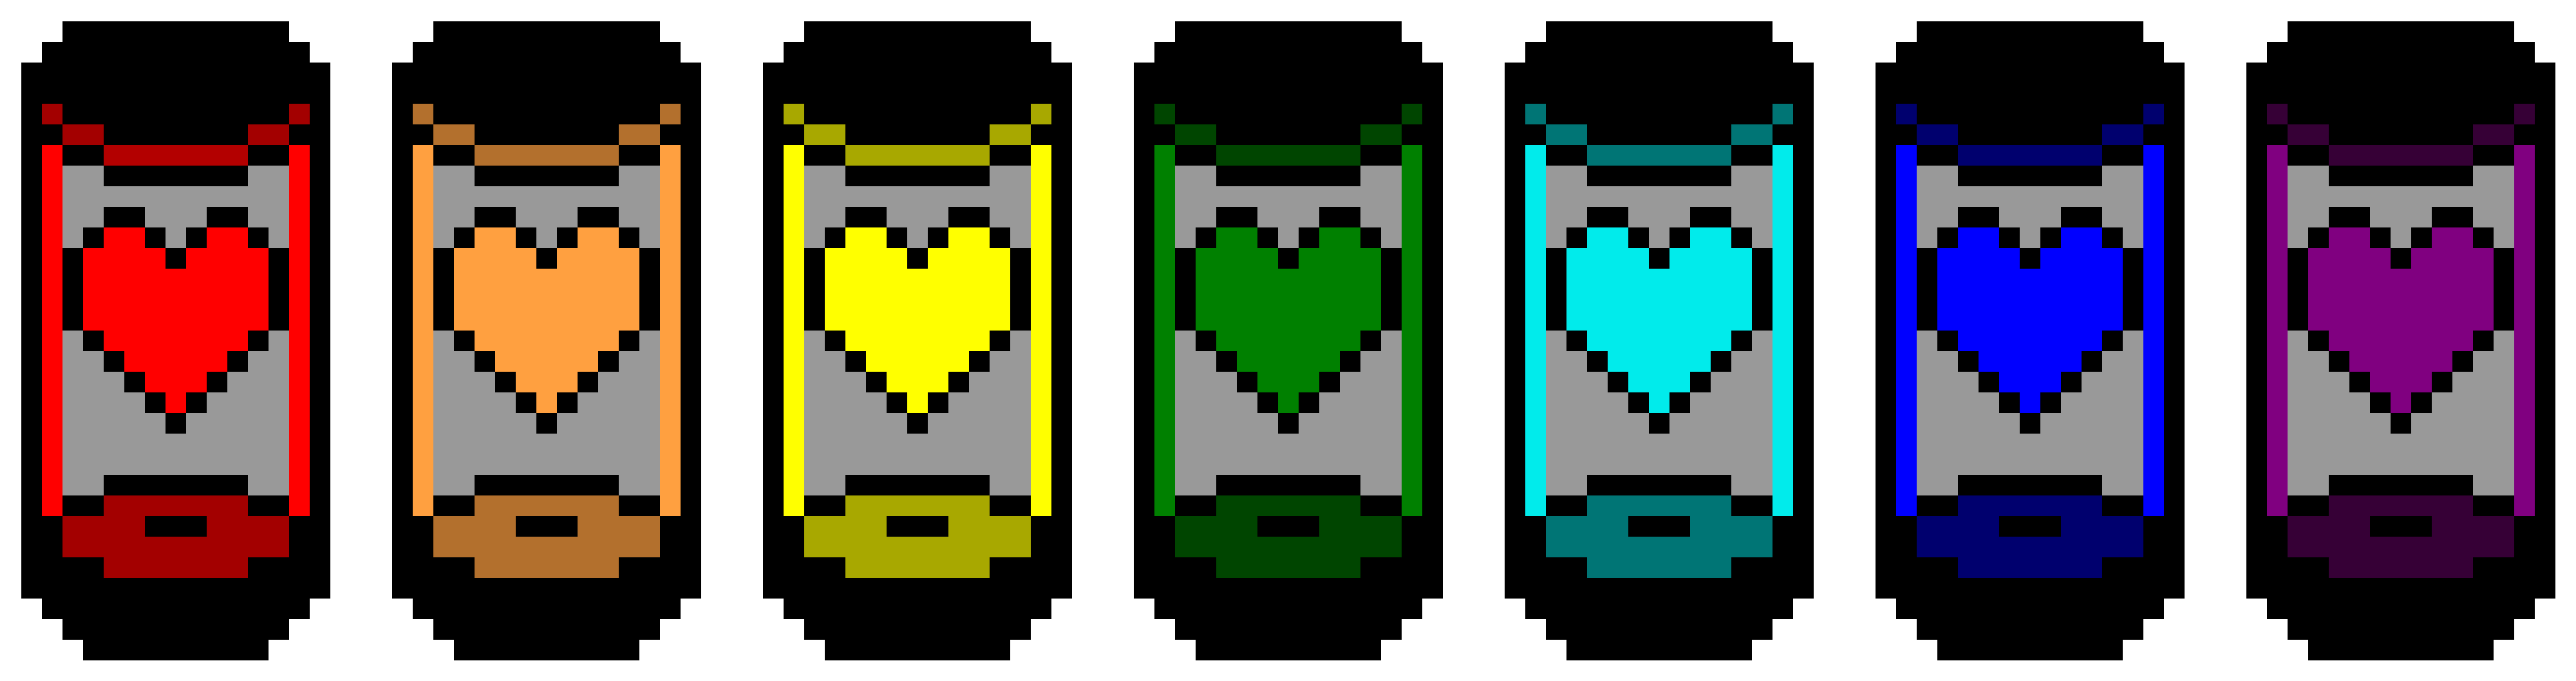 Pixelated Soul Jars Color Variety